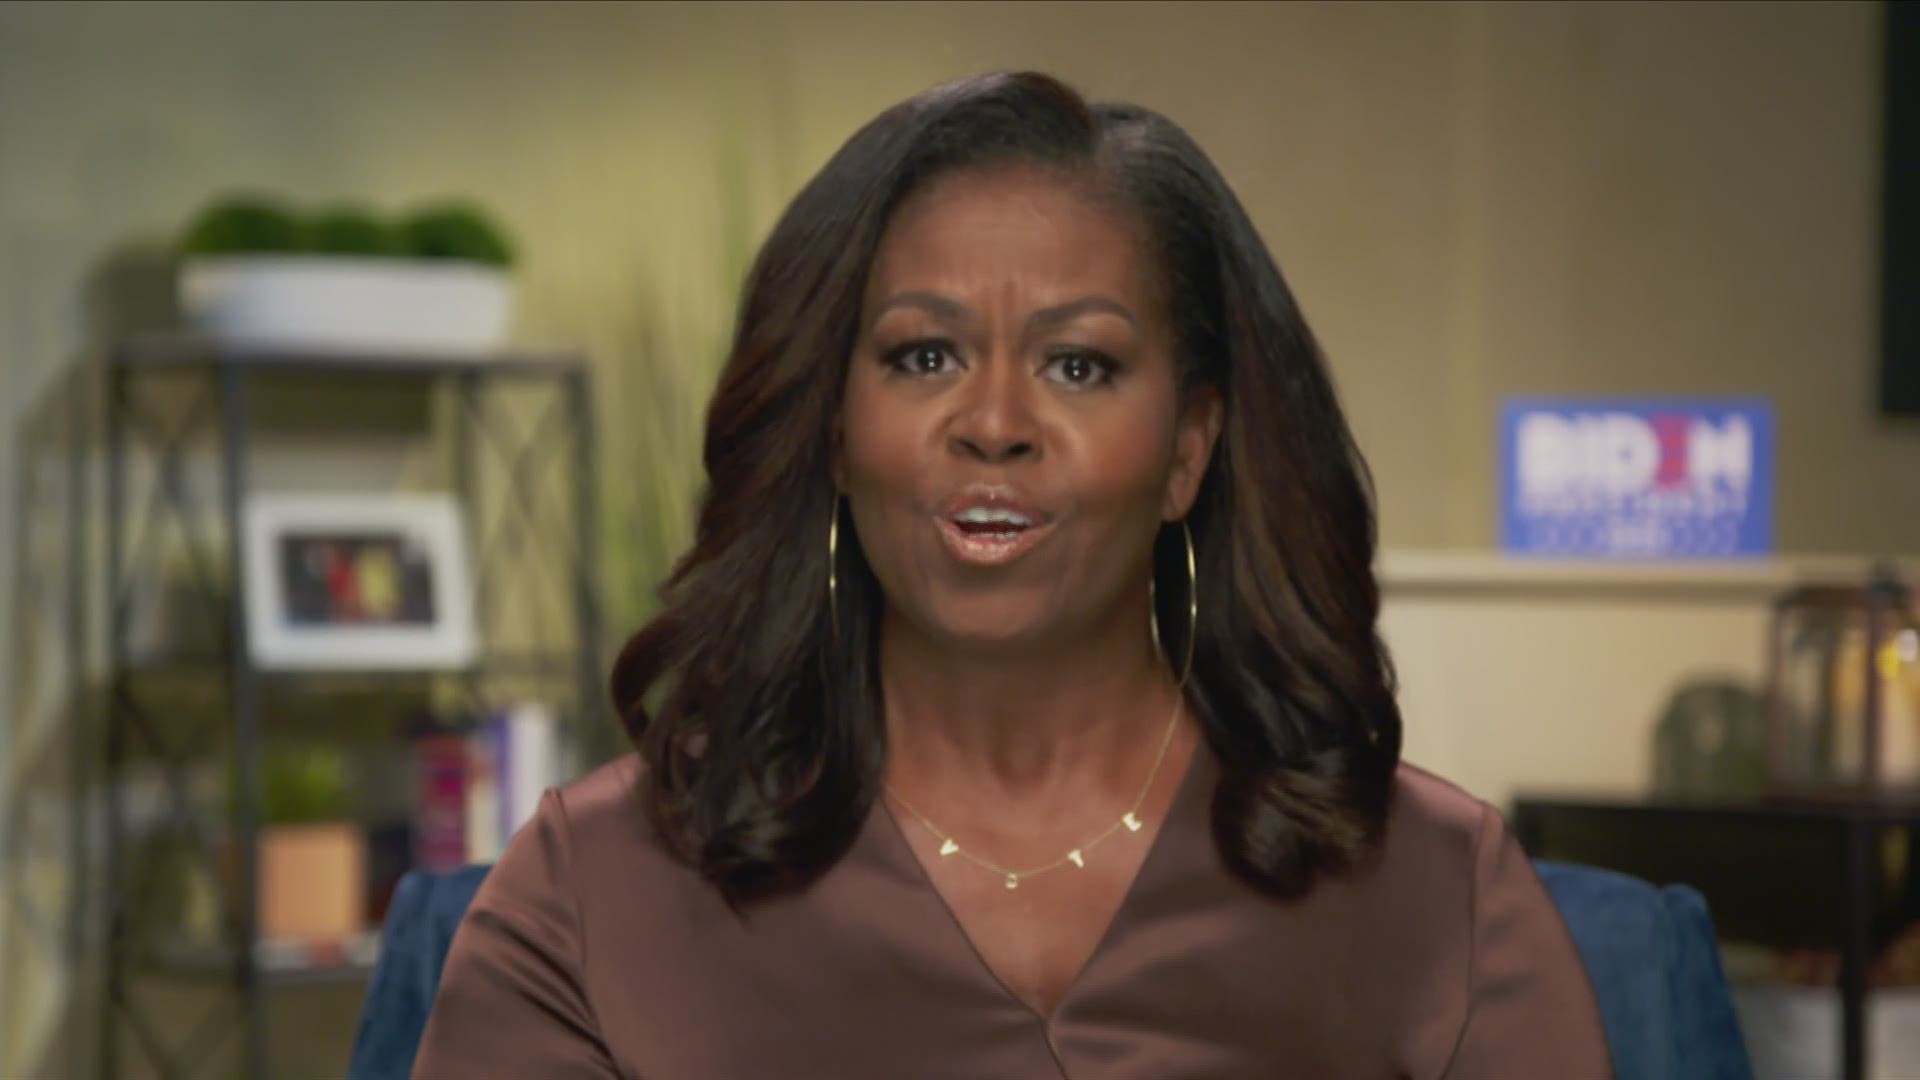 Michelle Obama said whenever we look to the current White House for leadership, what we get is 'chaos, division and a total and utter lack of empathy.'